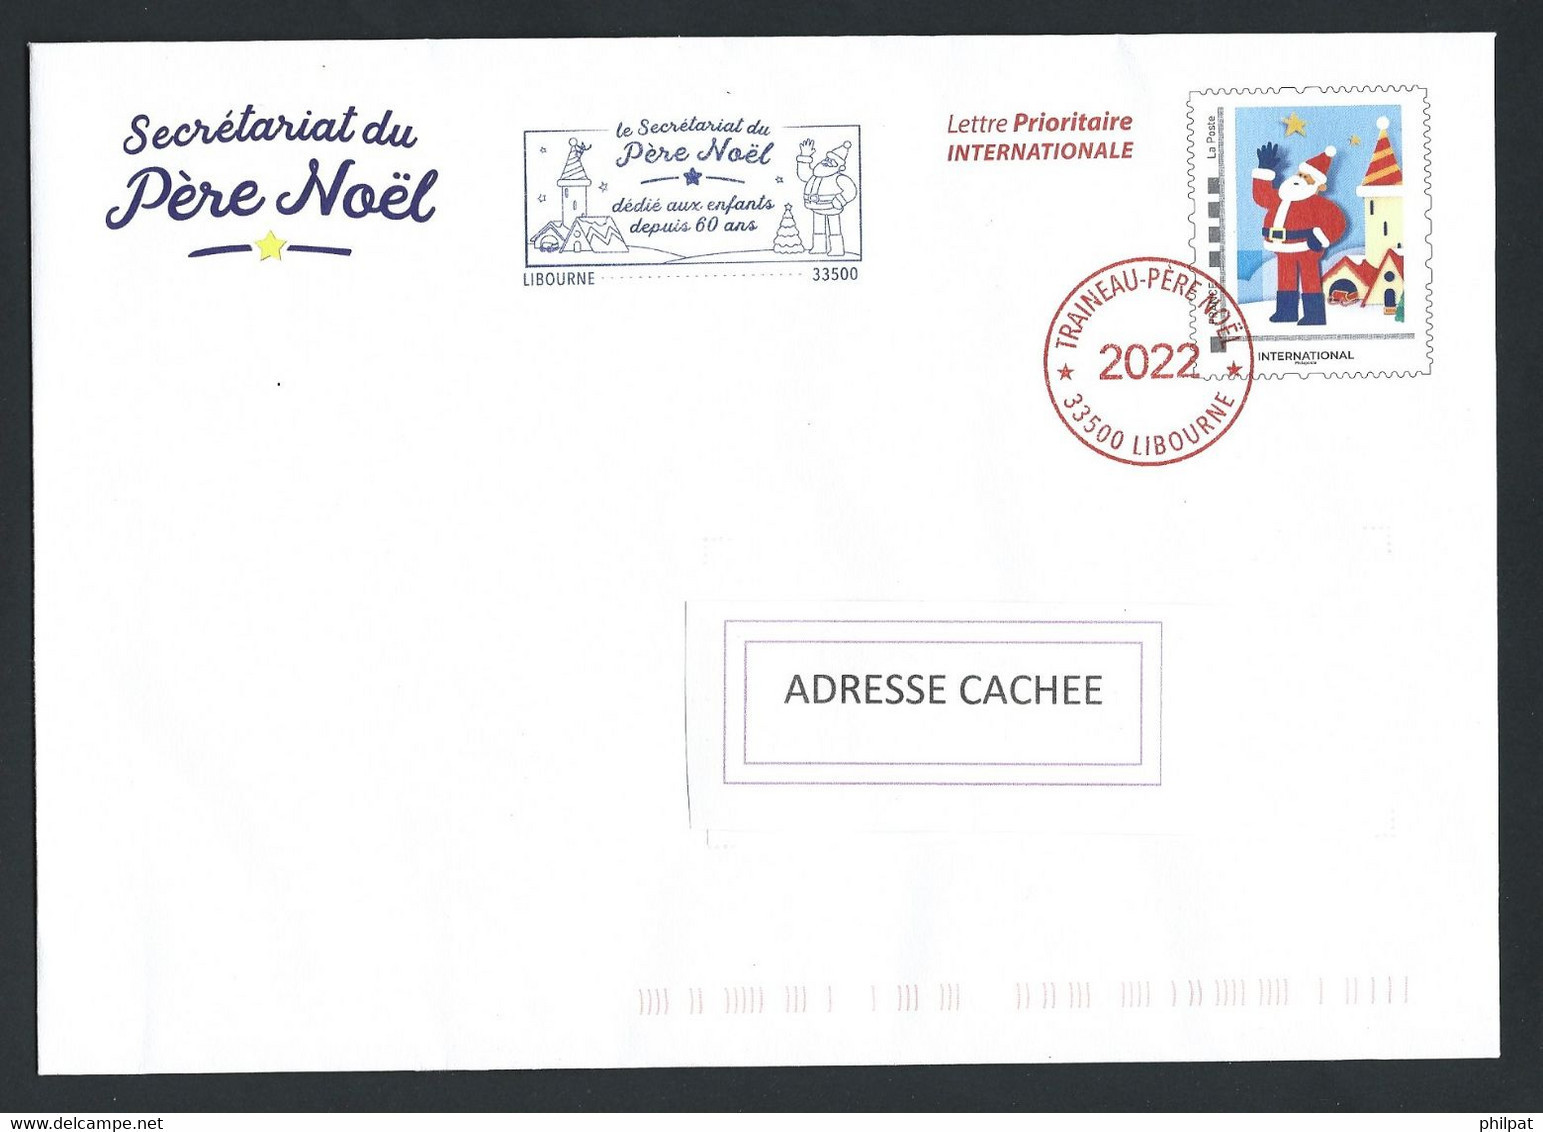 PAP PRET A POSTER HORS COMMERCE PERE NOEL 2022 LIBOURNE CHRISTMAS NAVIDAD - Prêts-à-poster:Stamped On Demand & Semi-official Overprinting (1995-...)